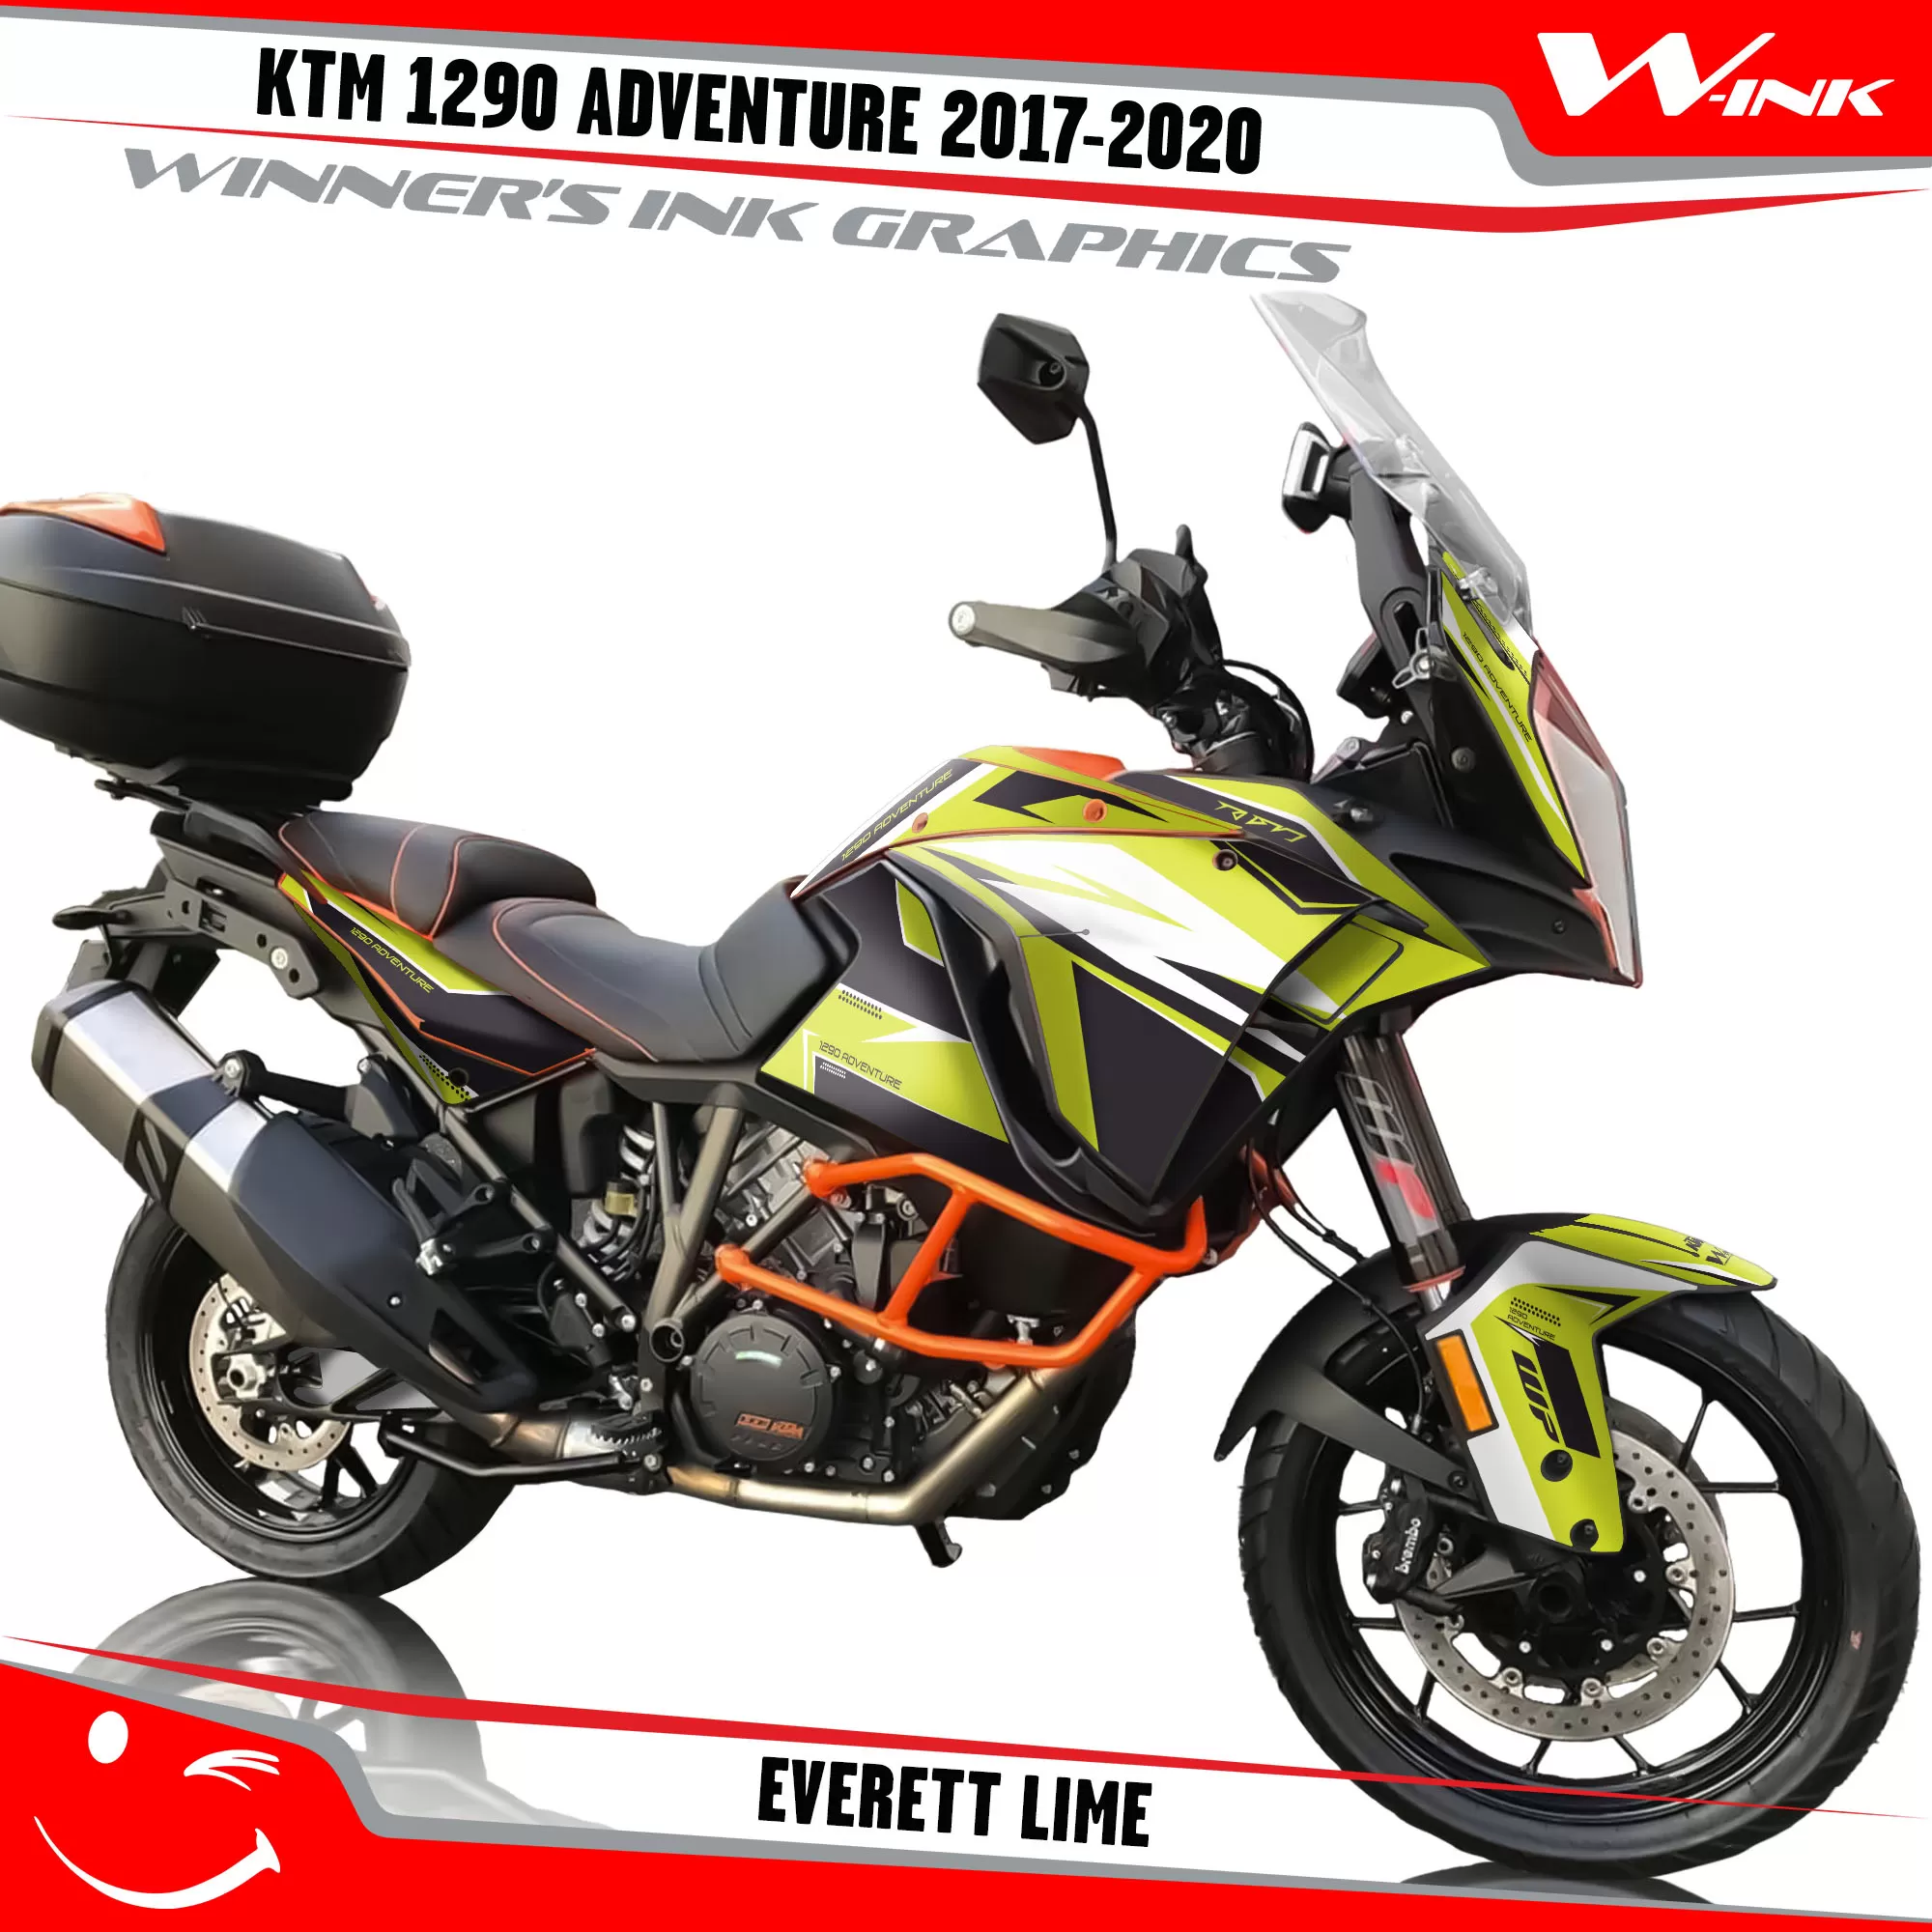 KTM-Adventure-1290-2017-2018-2019-2020-graphics-kit-and-decals-Everett-Lime